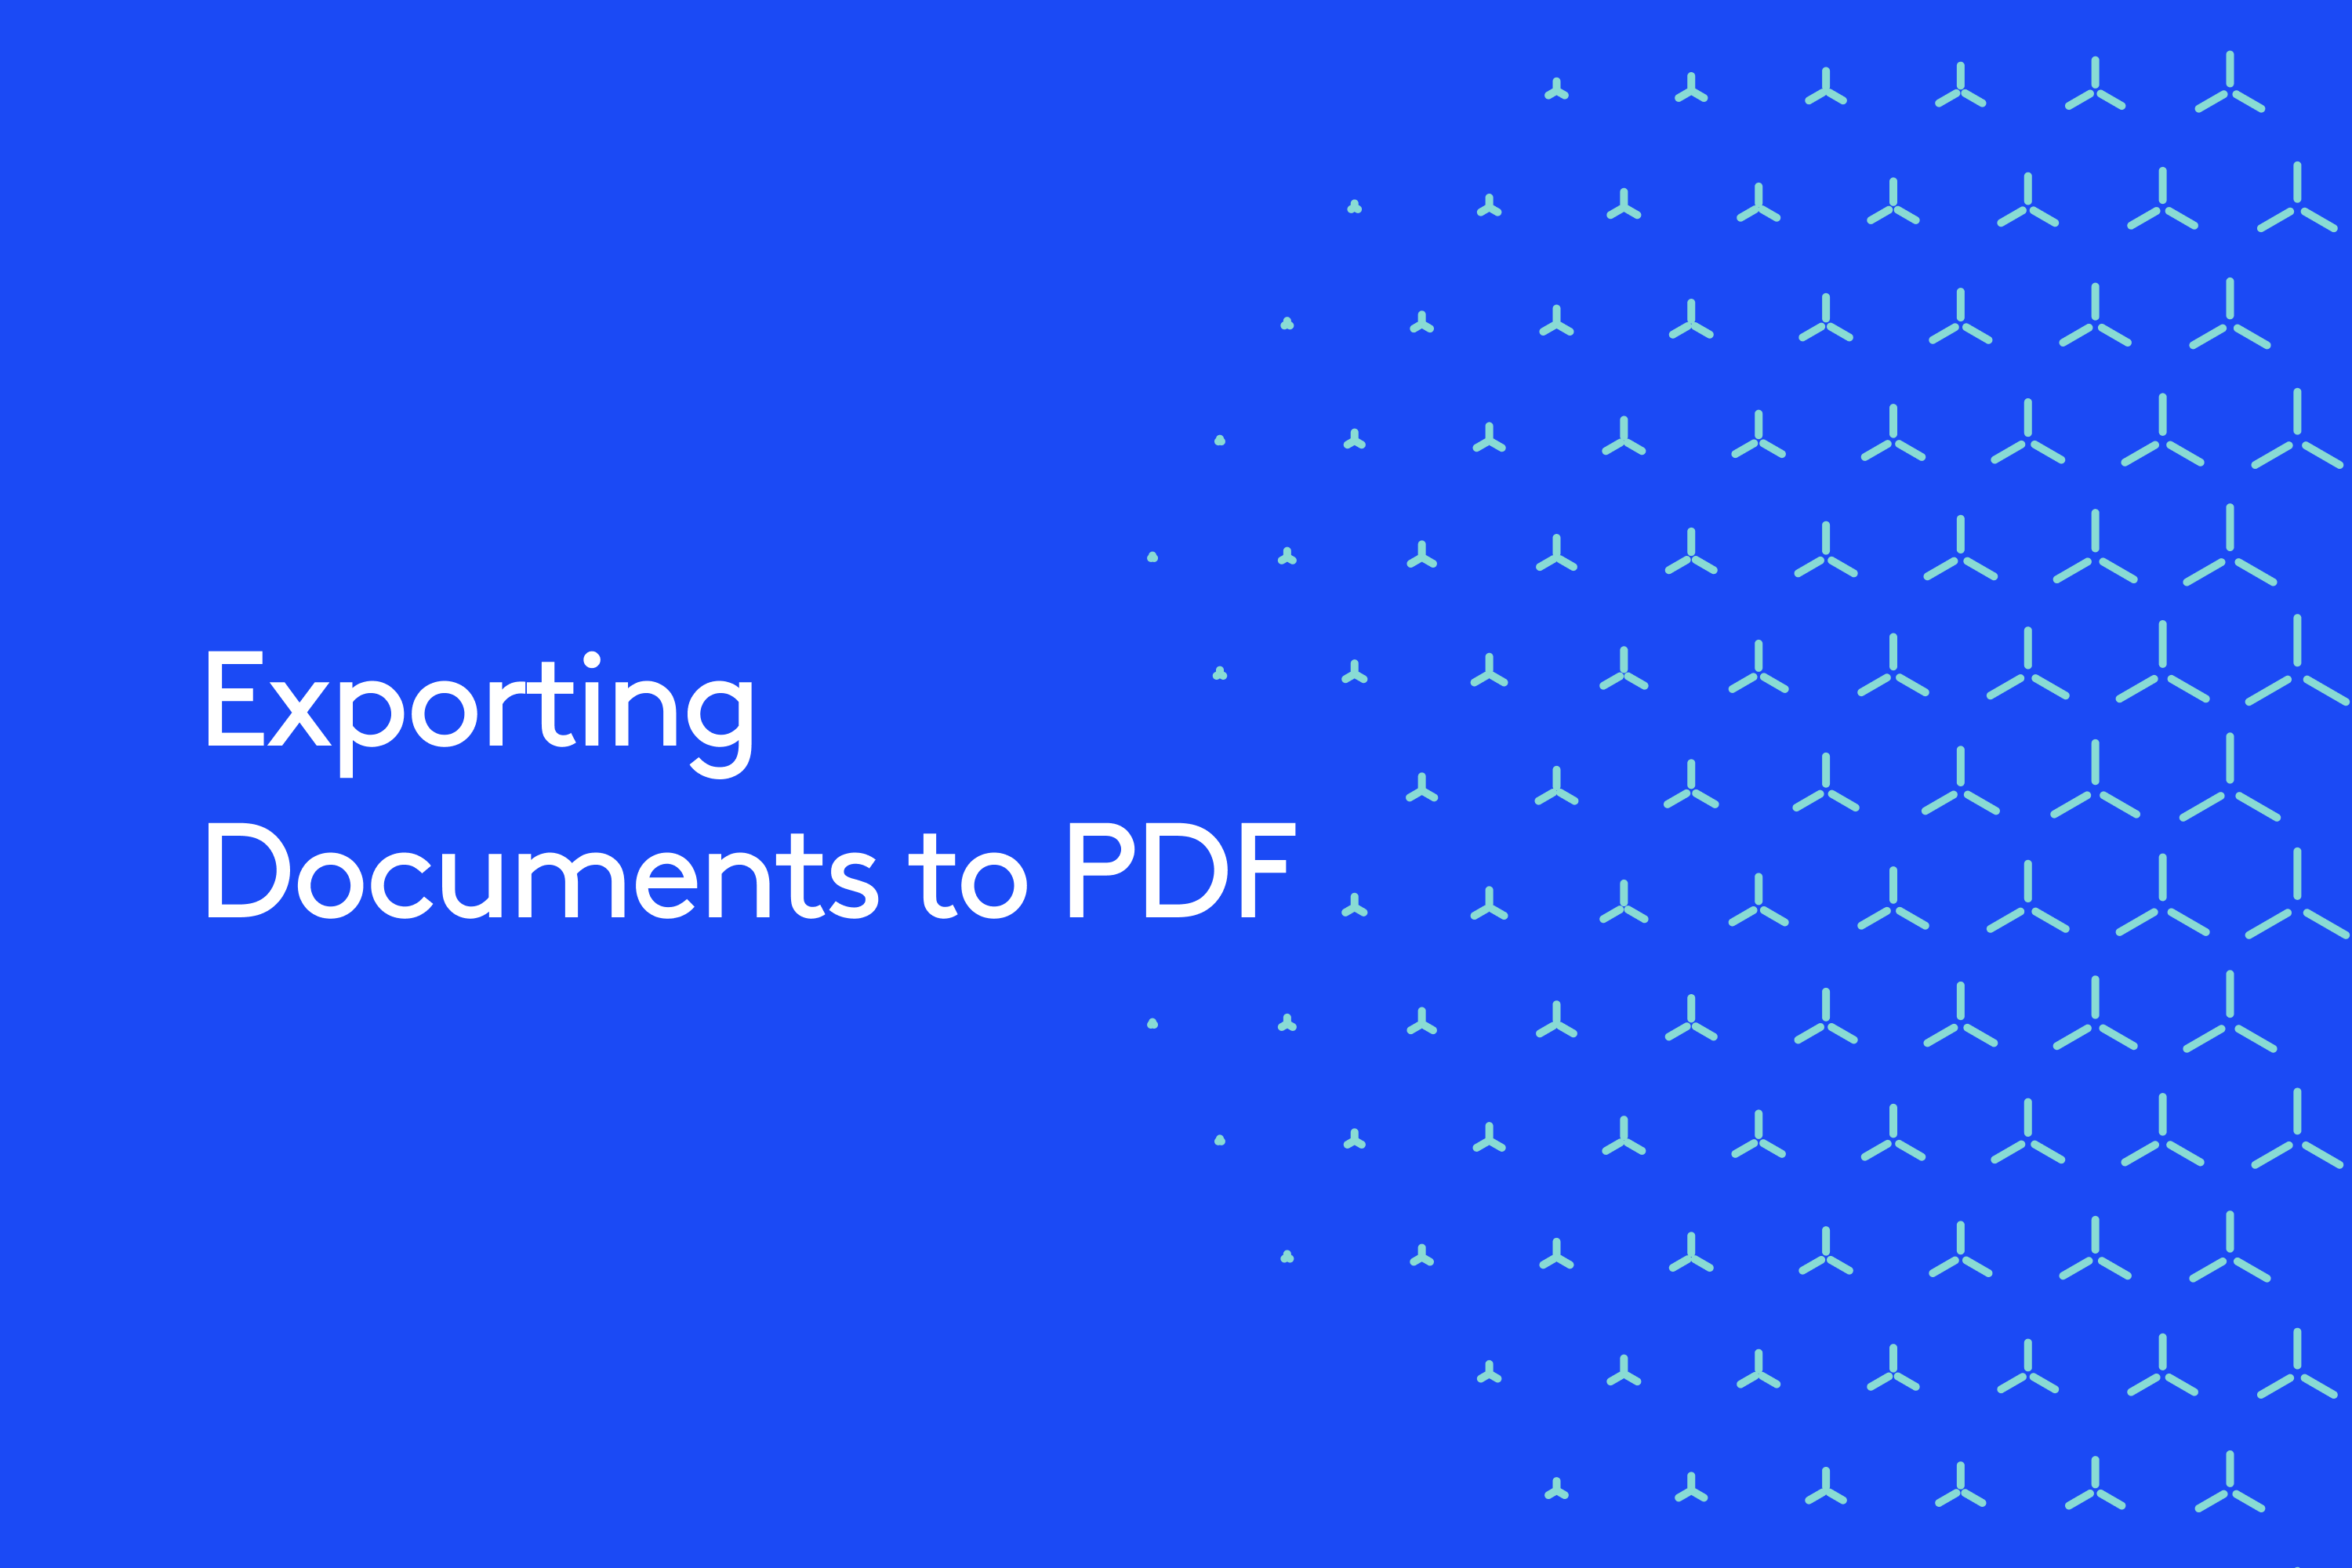 Exporting Documents to PDF